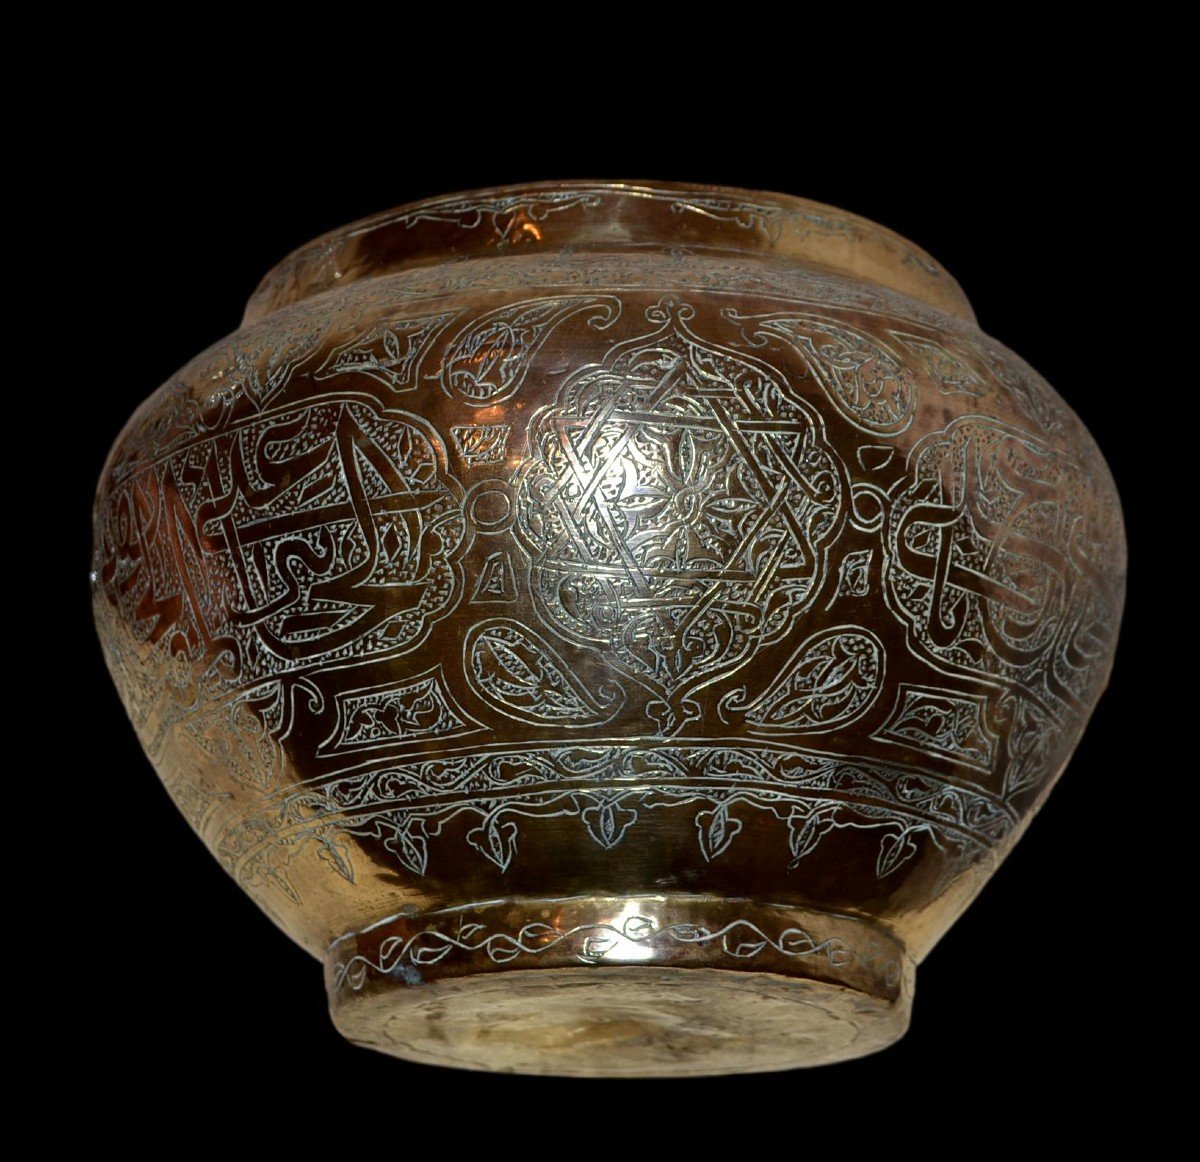 Old Basin, Middle East Chiseled With Three Cartridges And Three Mandorlas, 19th Century